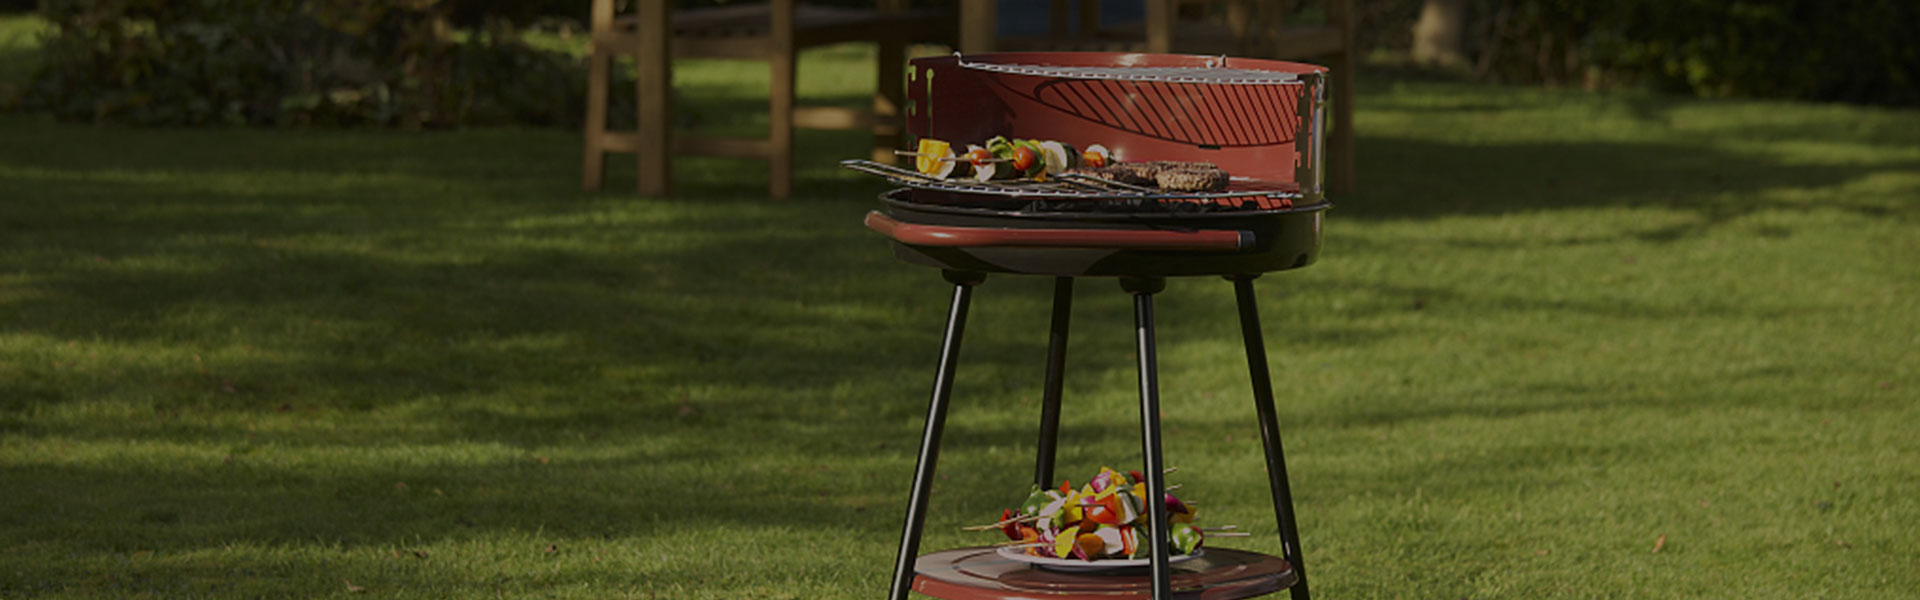 Toposon-Reliable Camping Barbecue Equipment Supplier